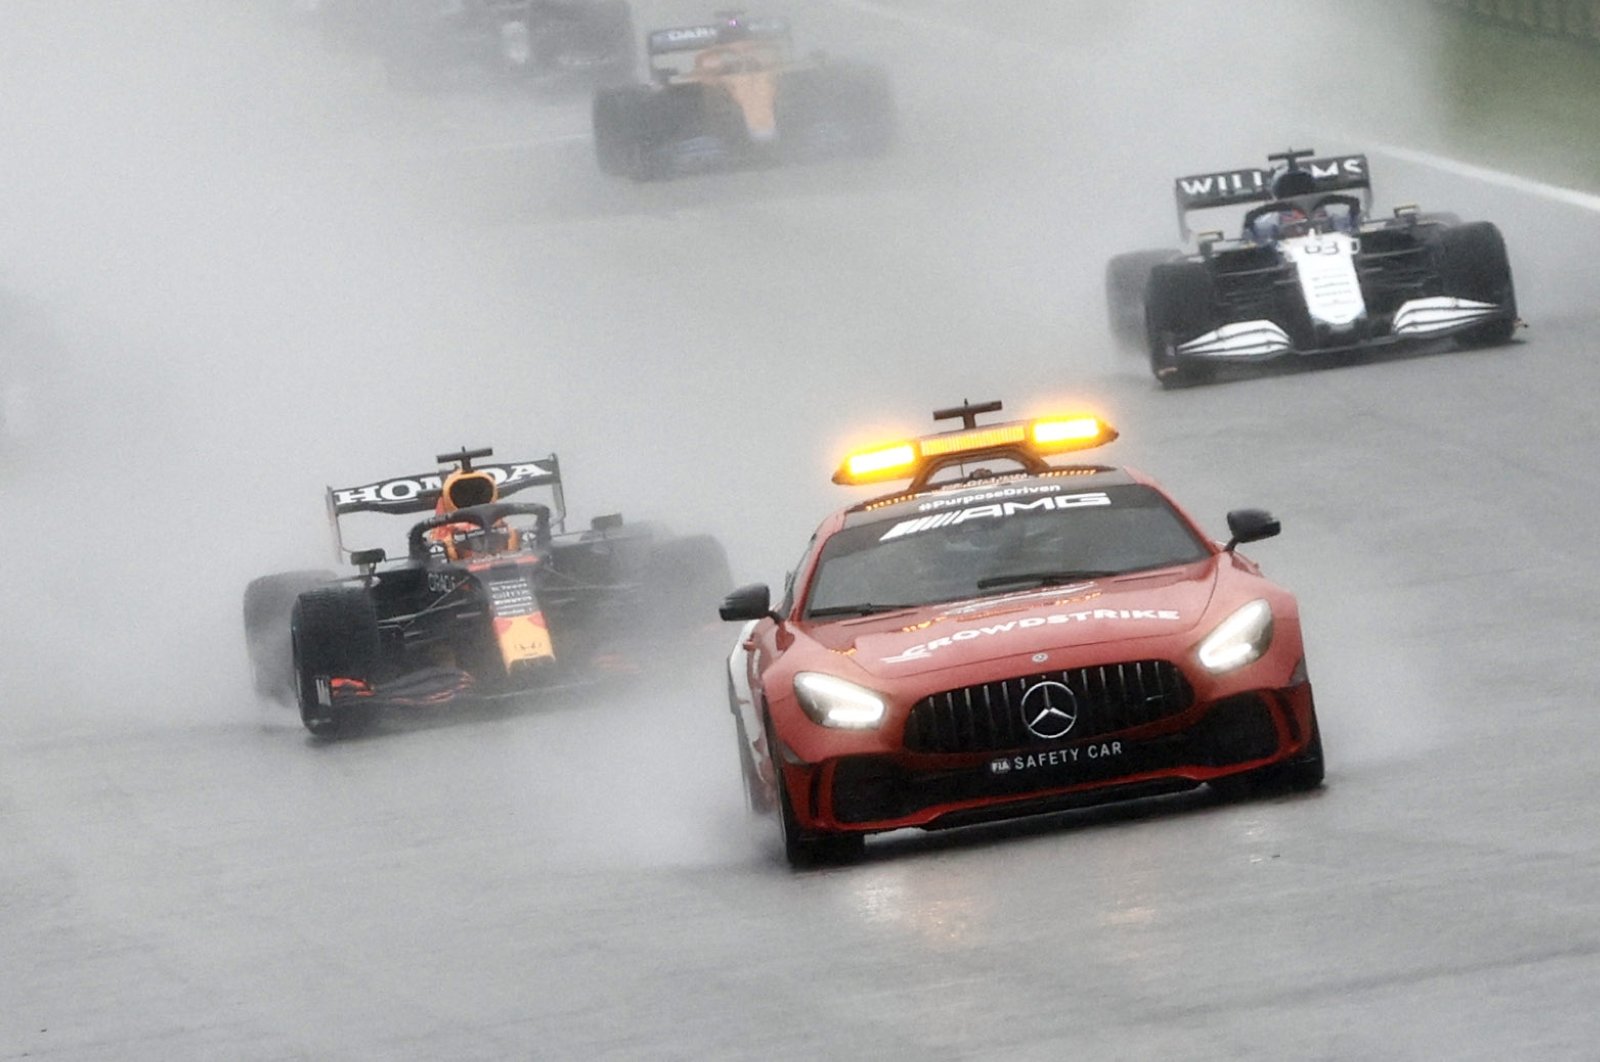 A Formula One safety car leads race drivers as the start of the Belgian Grand Prix is delayed due to bad weather at Spa, Belgium, Aug. 29, 2021. (Reuters Photo)